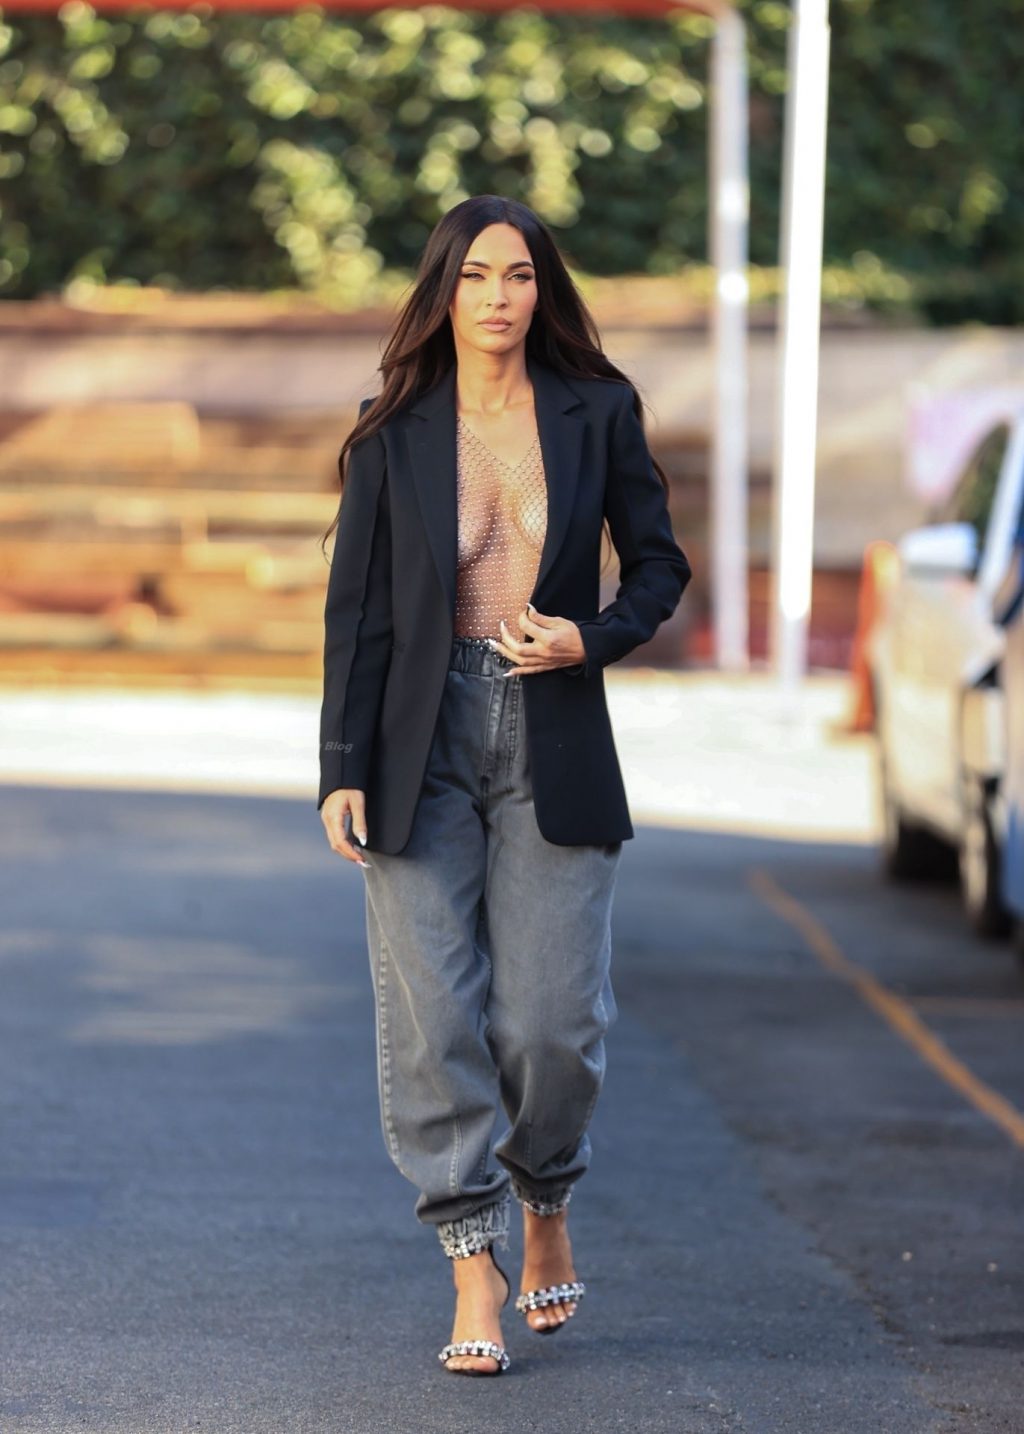 Megan Fox Leaves Little to Imagination While Leaving a Photoshoot in LA (19 Photos)